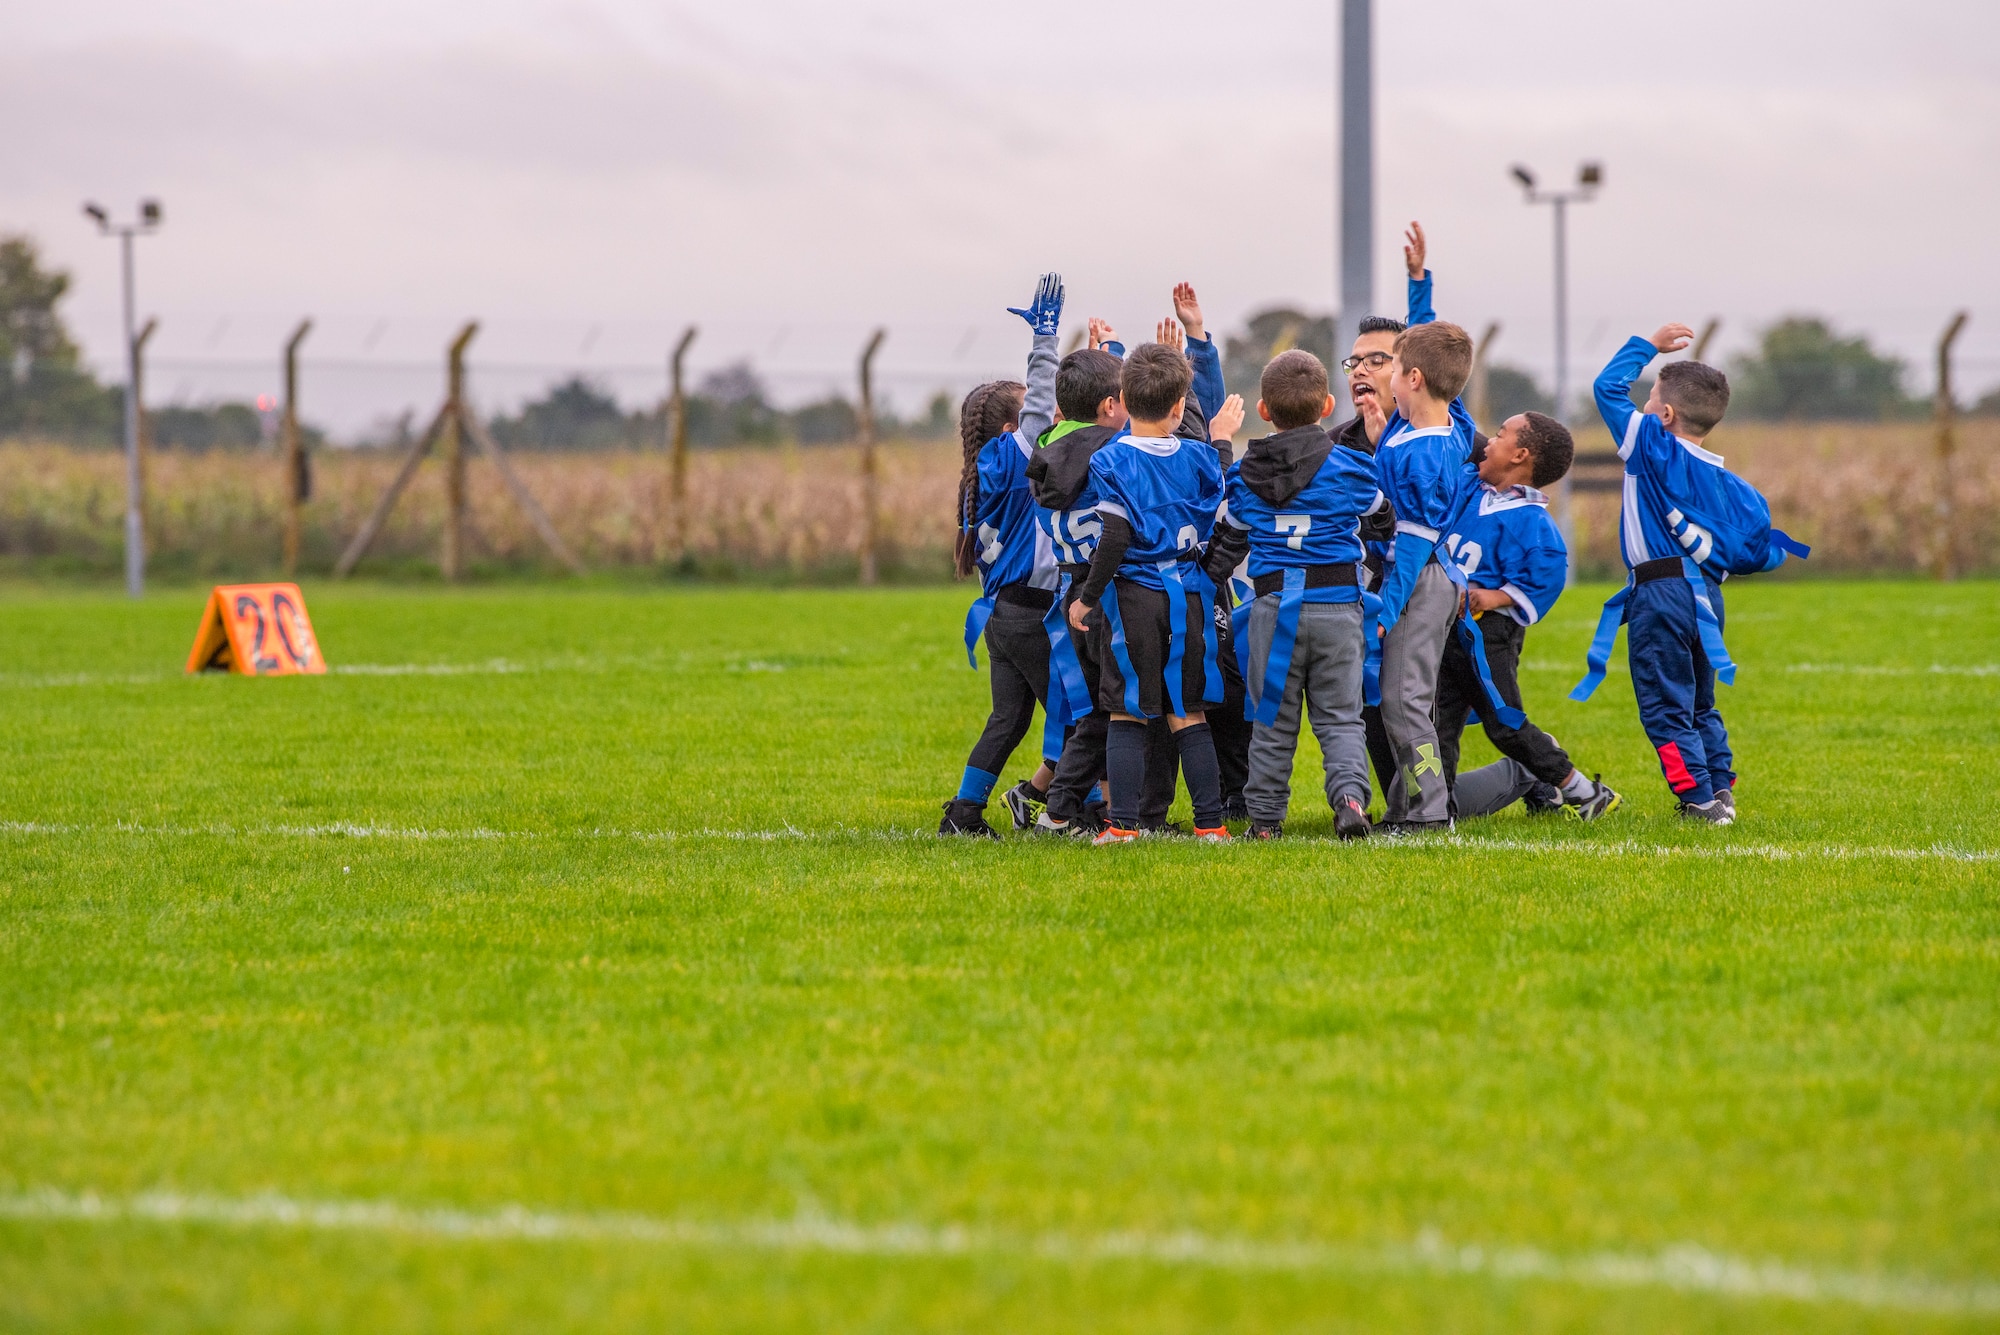 A children’s flag football team breaks from the huddle before their game at Heritage Park Oct. 7, 2019, at RAF Mildenhall, England. The park reopened following a six-month renovation. (U.S. Air Force photo by Airman 1st Class Joseph Barron)